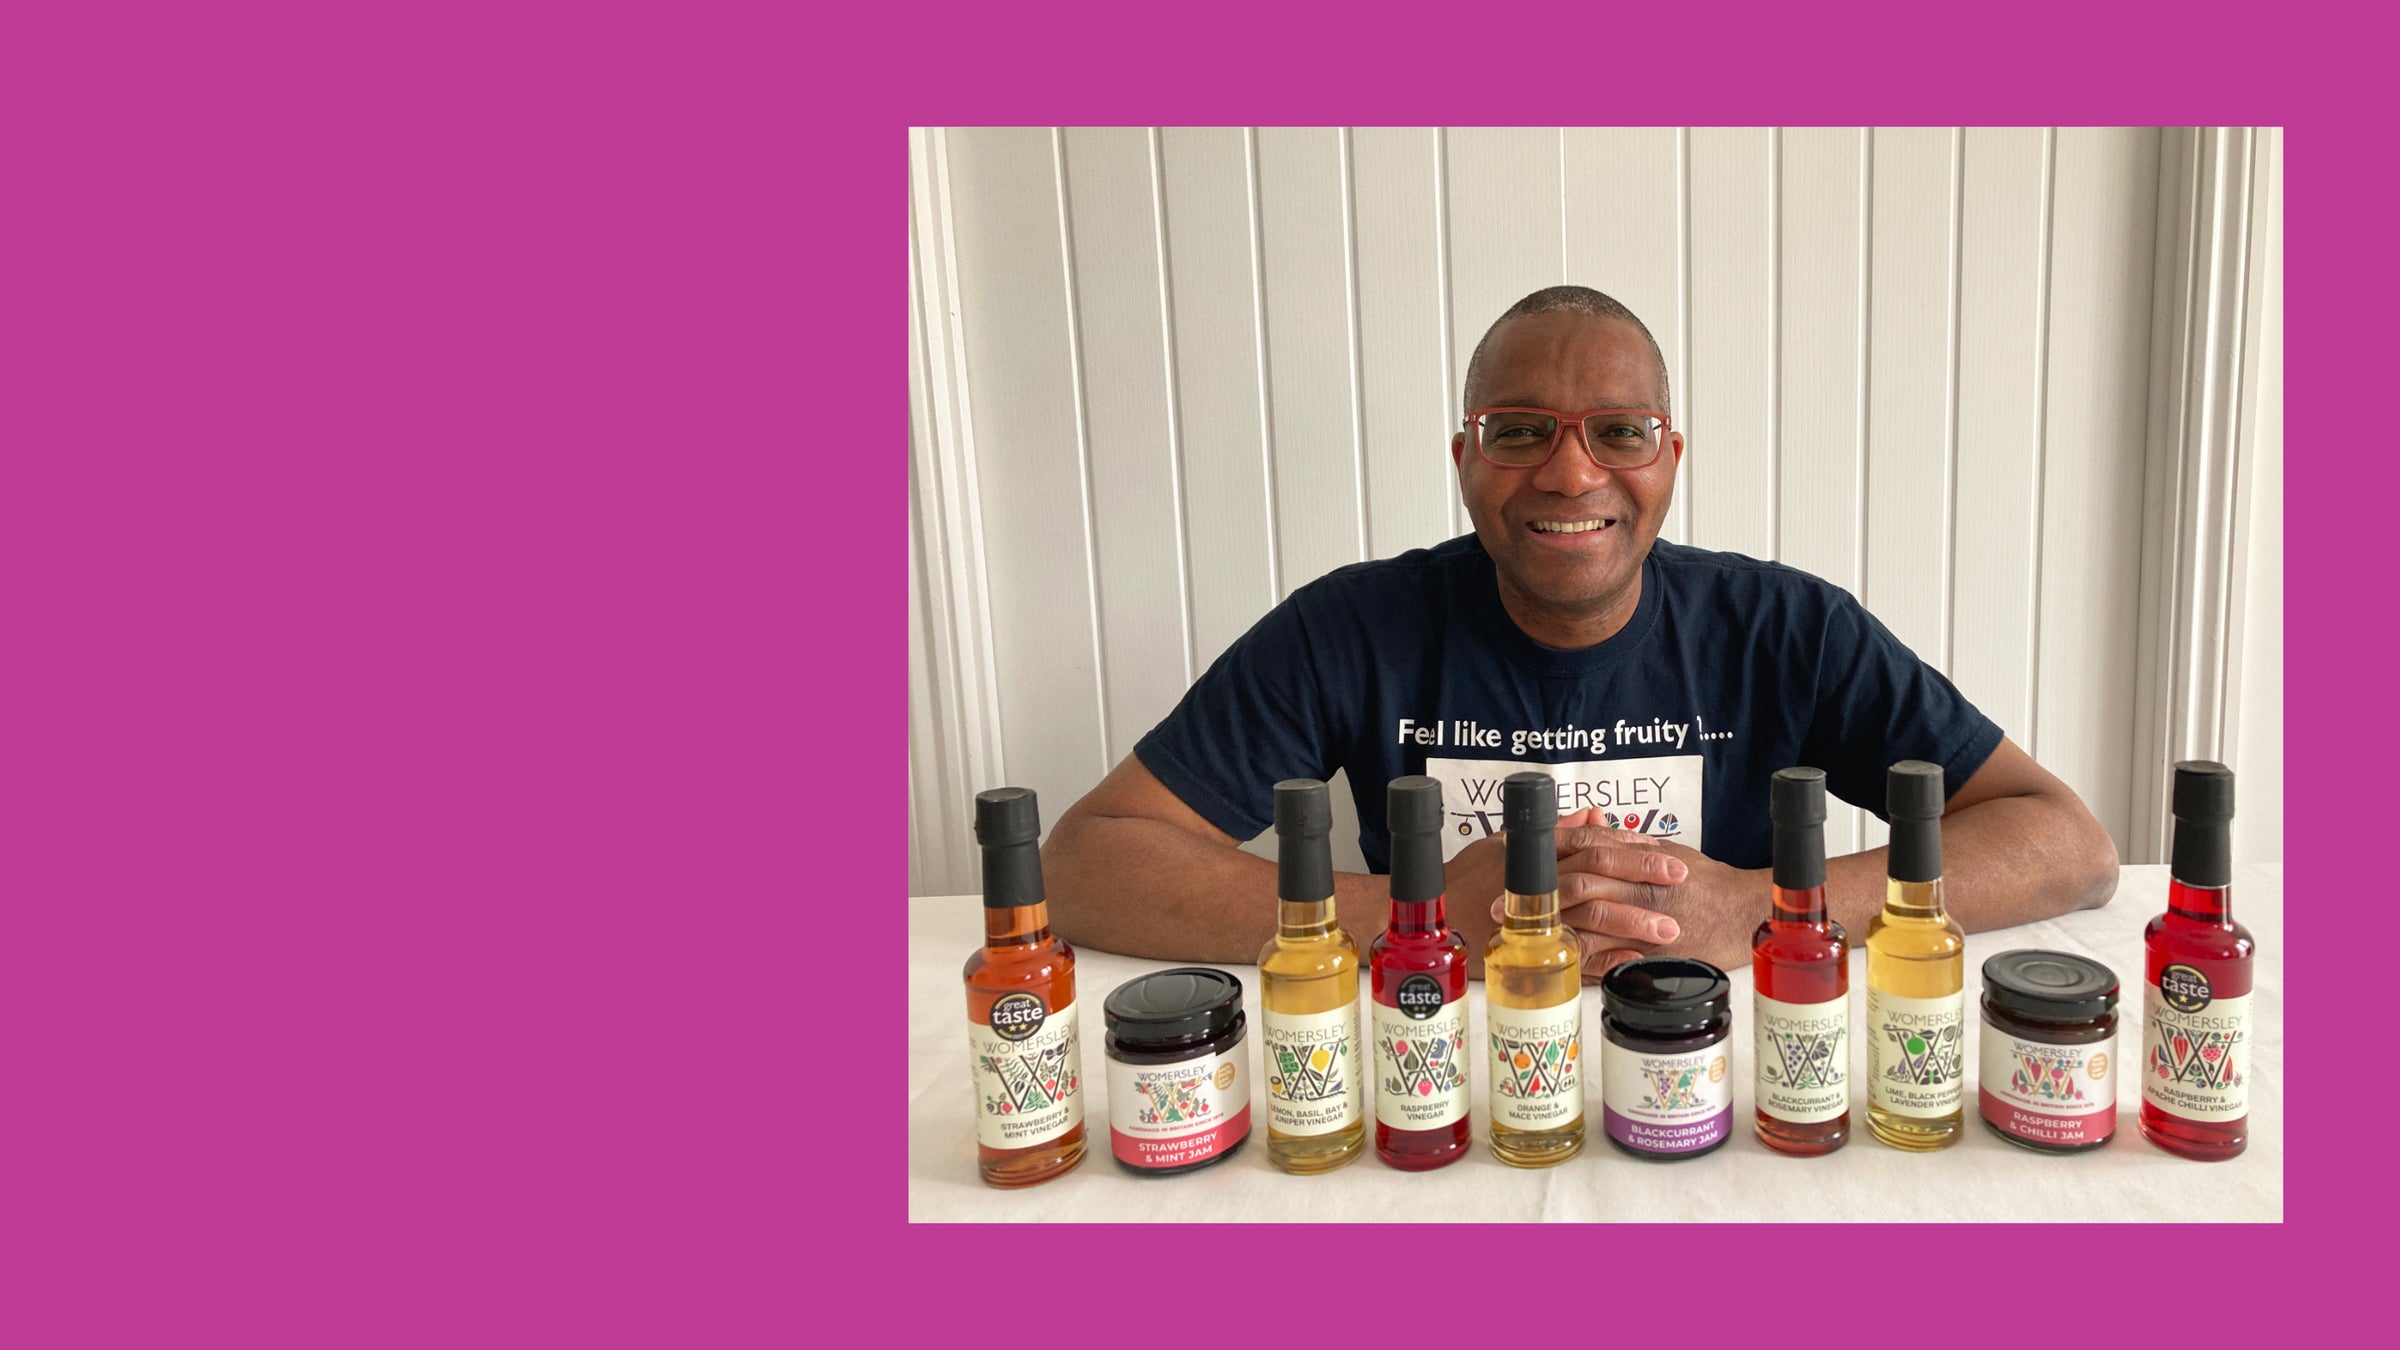 Picture of Labaika smiling and sitting behind a row of Womersley Foods bottles Fruit Vinegars.